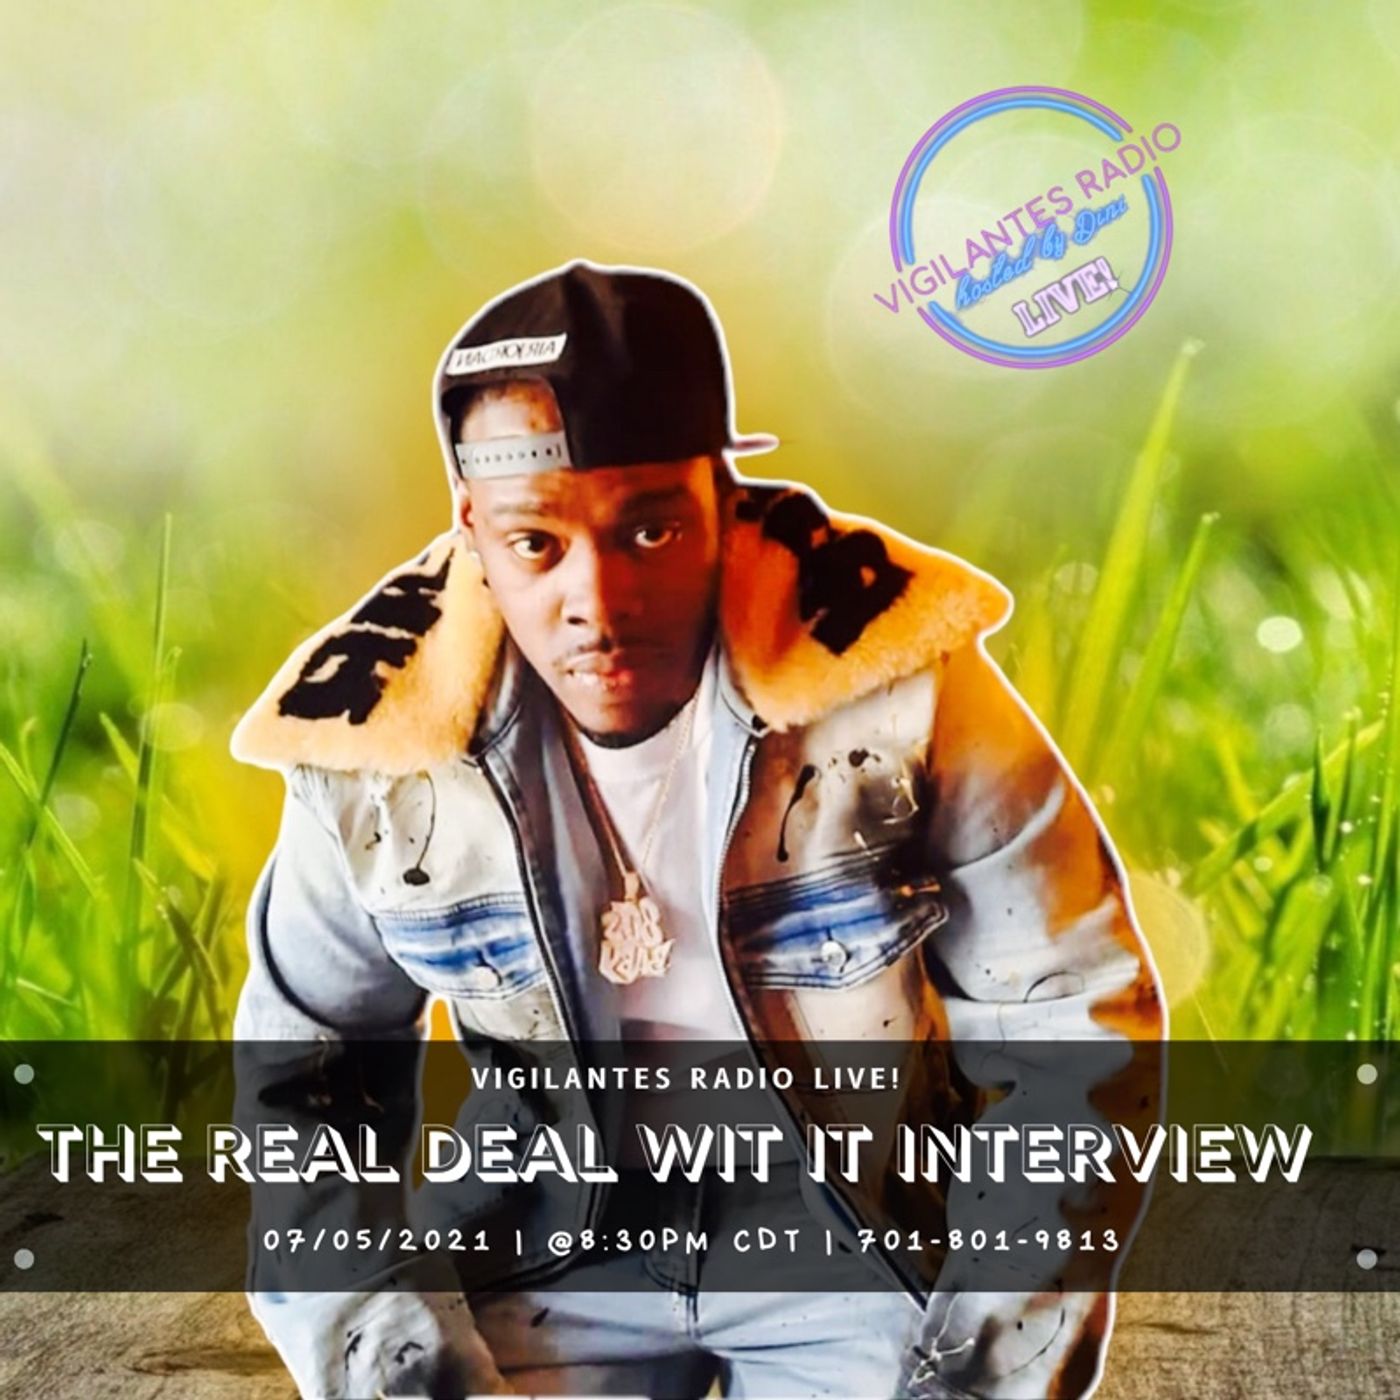 The Real Deal Wit It Interview. Image